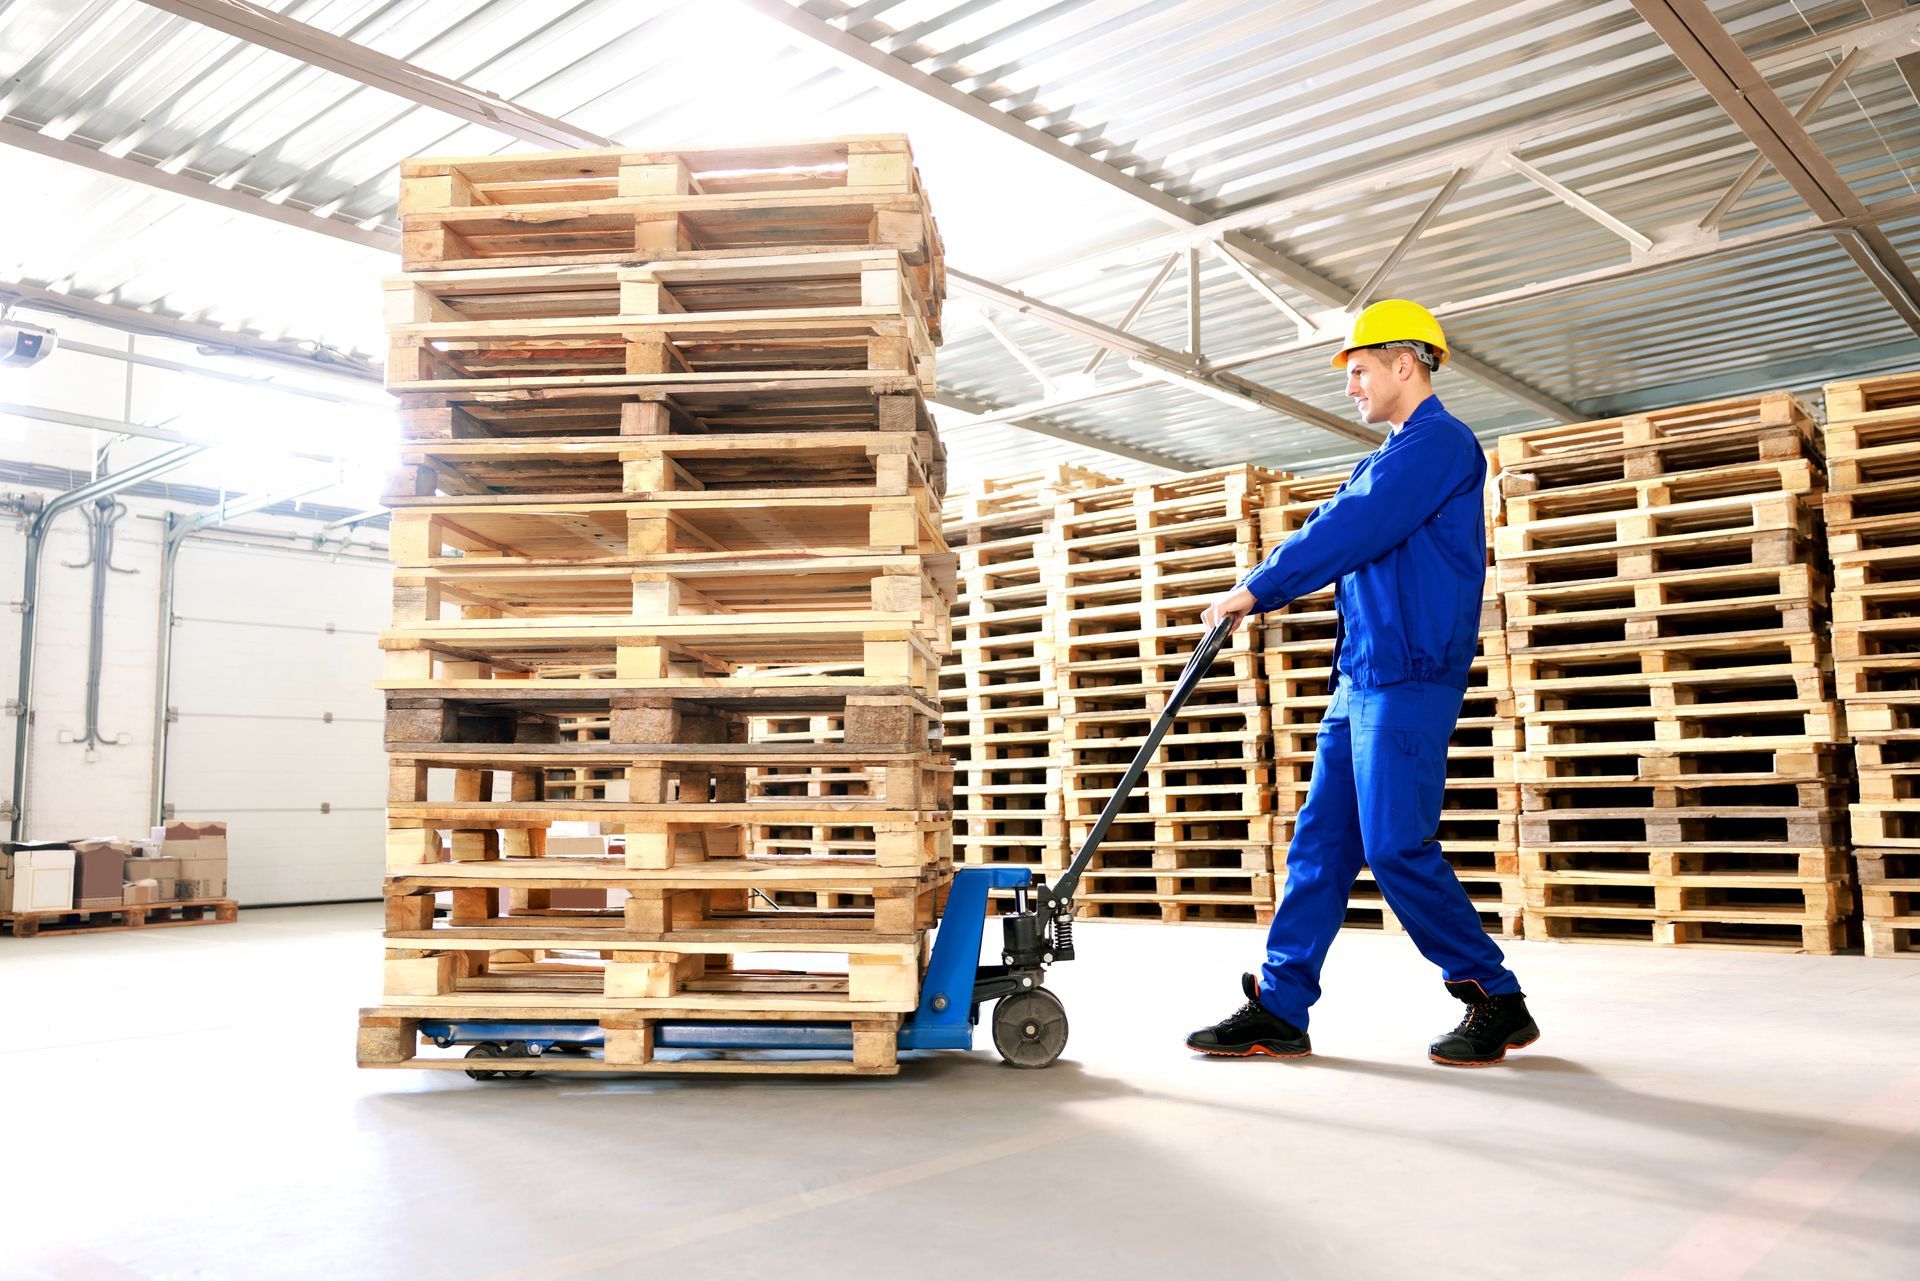 a man is pushing a cart full of wooden pallets showing pallet stacking